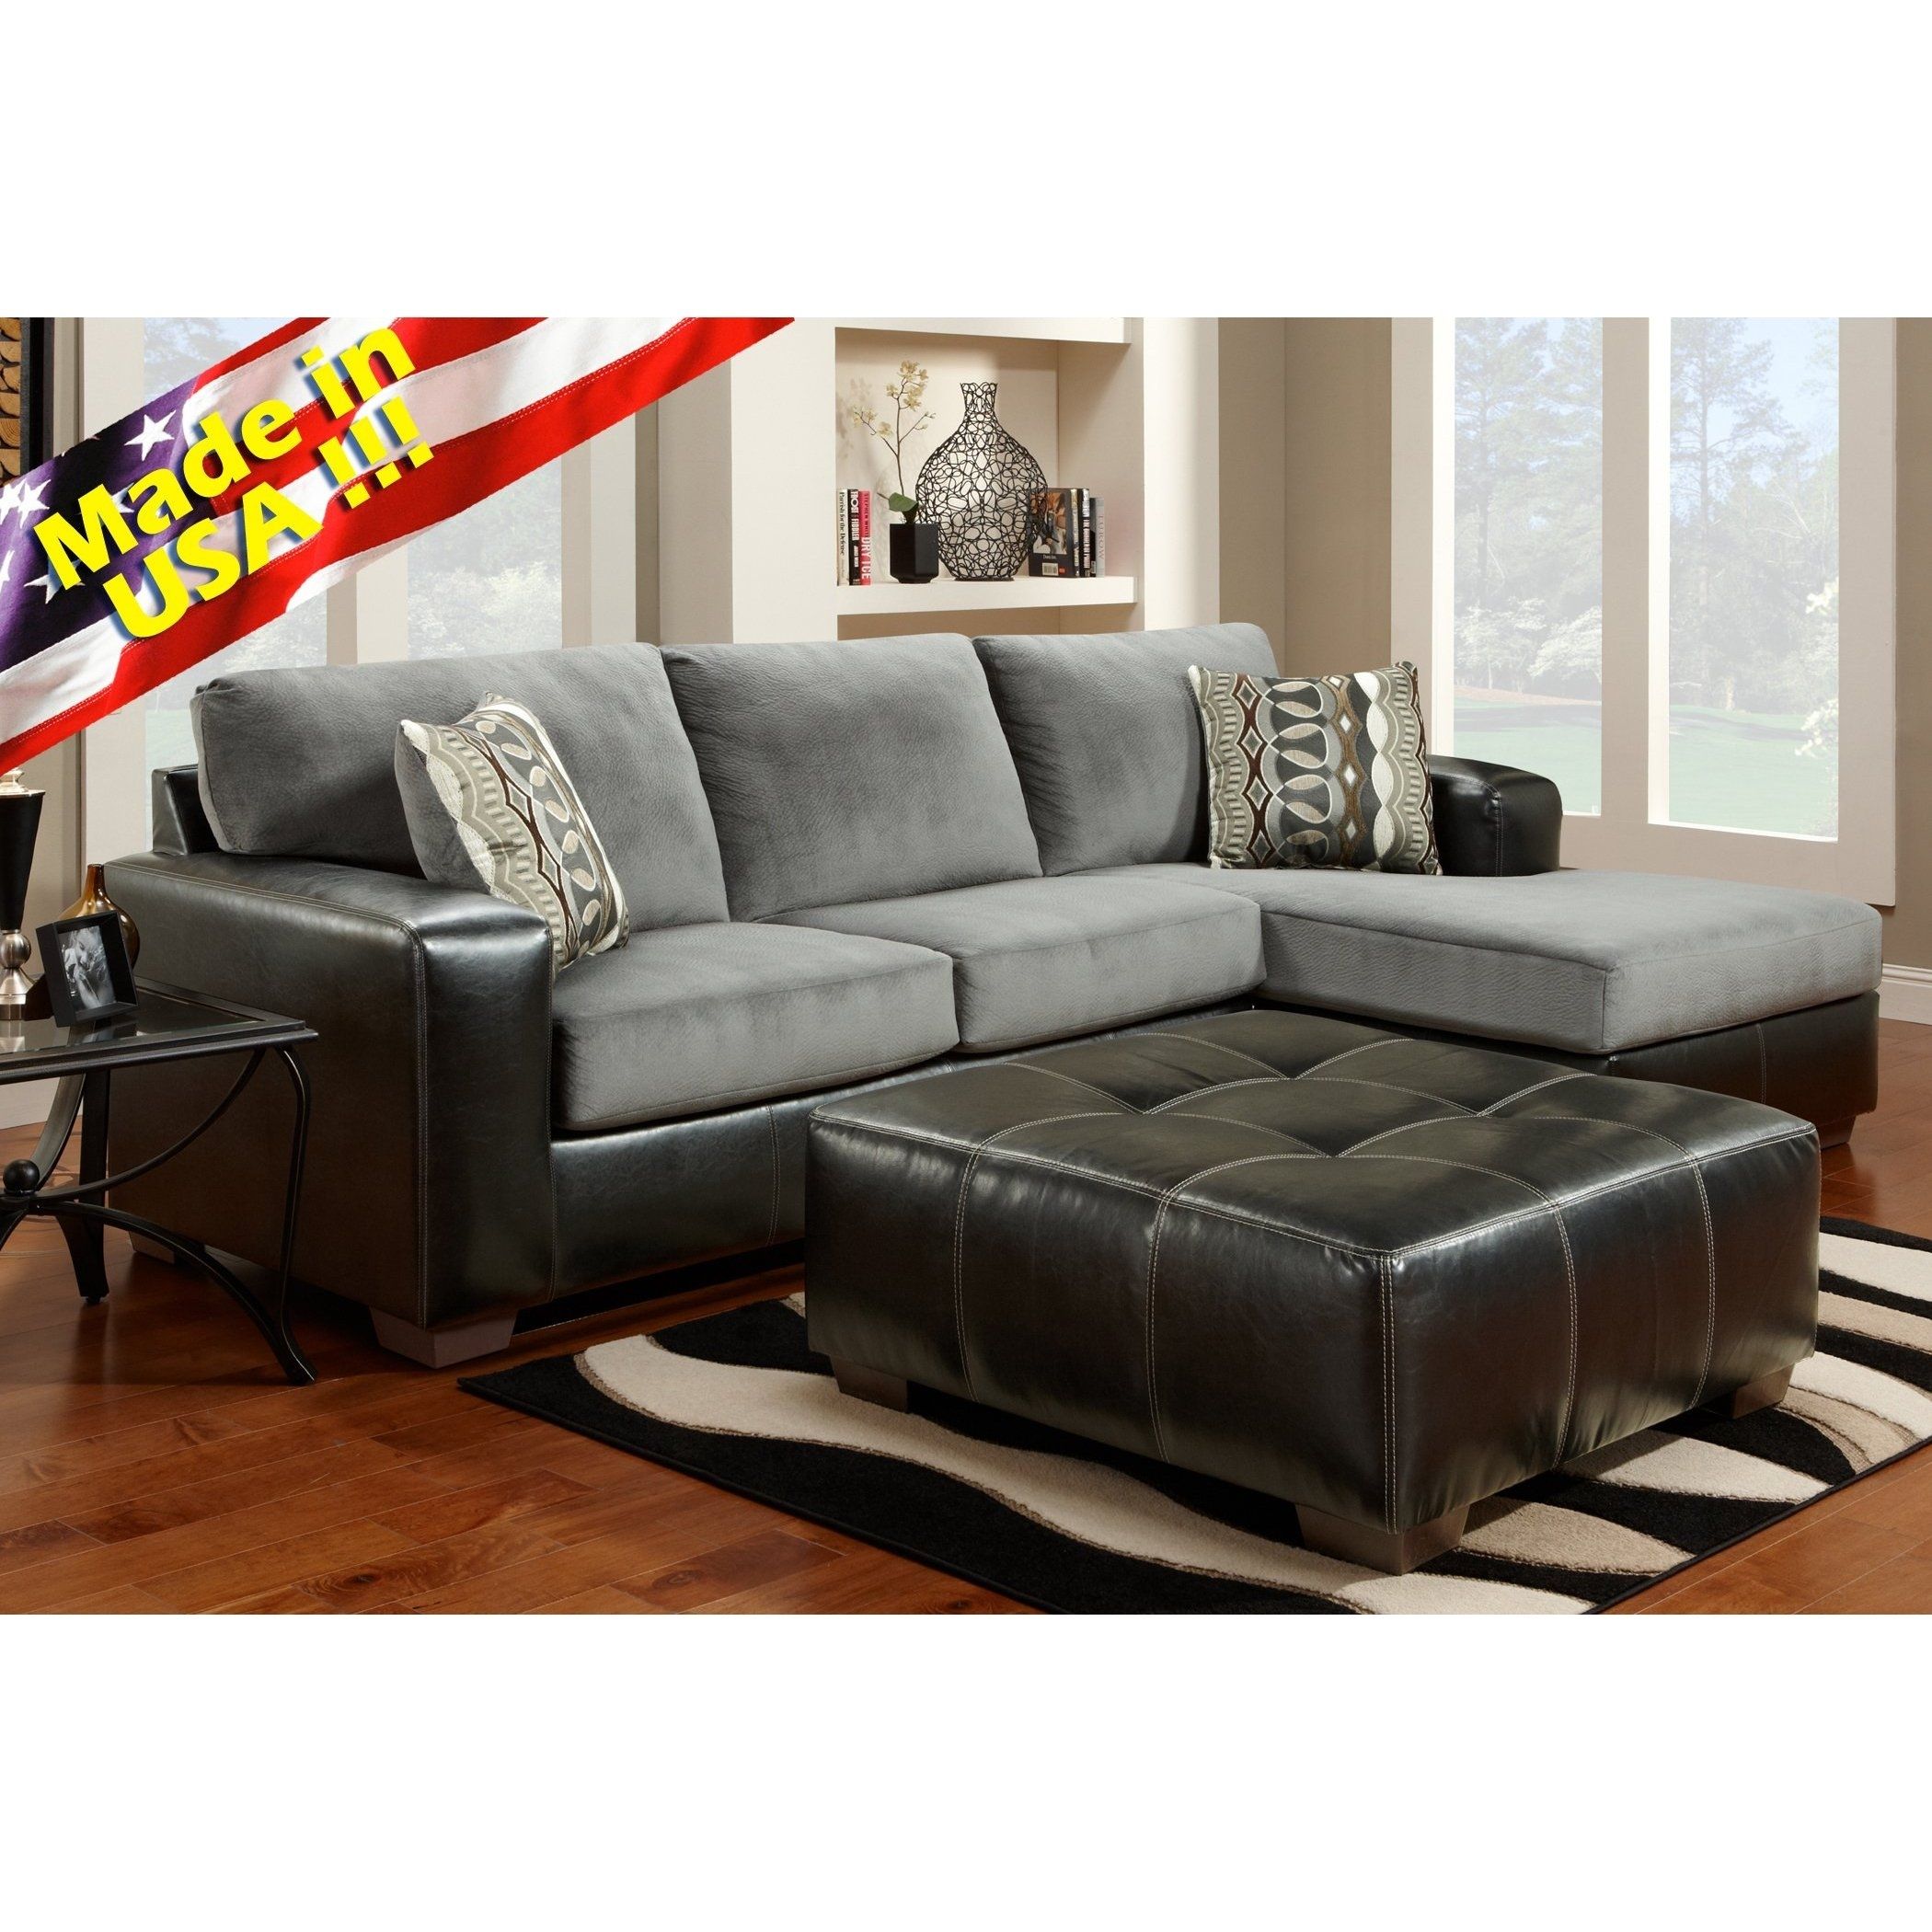 Cumulus Black Gray Two Toned Sectional Sofa Chaise Set, Made In Usa Throughout Made In Usa Sectional Sofas (View 7 of 10)